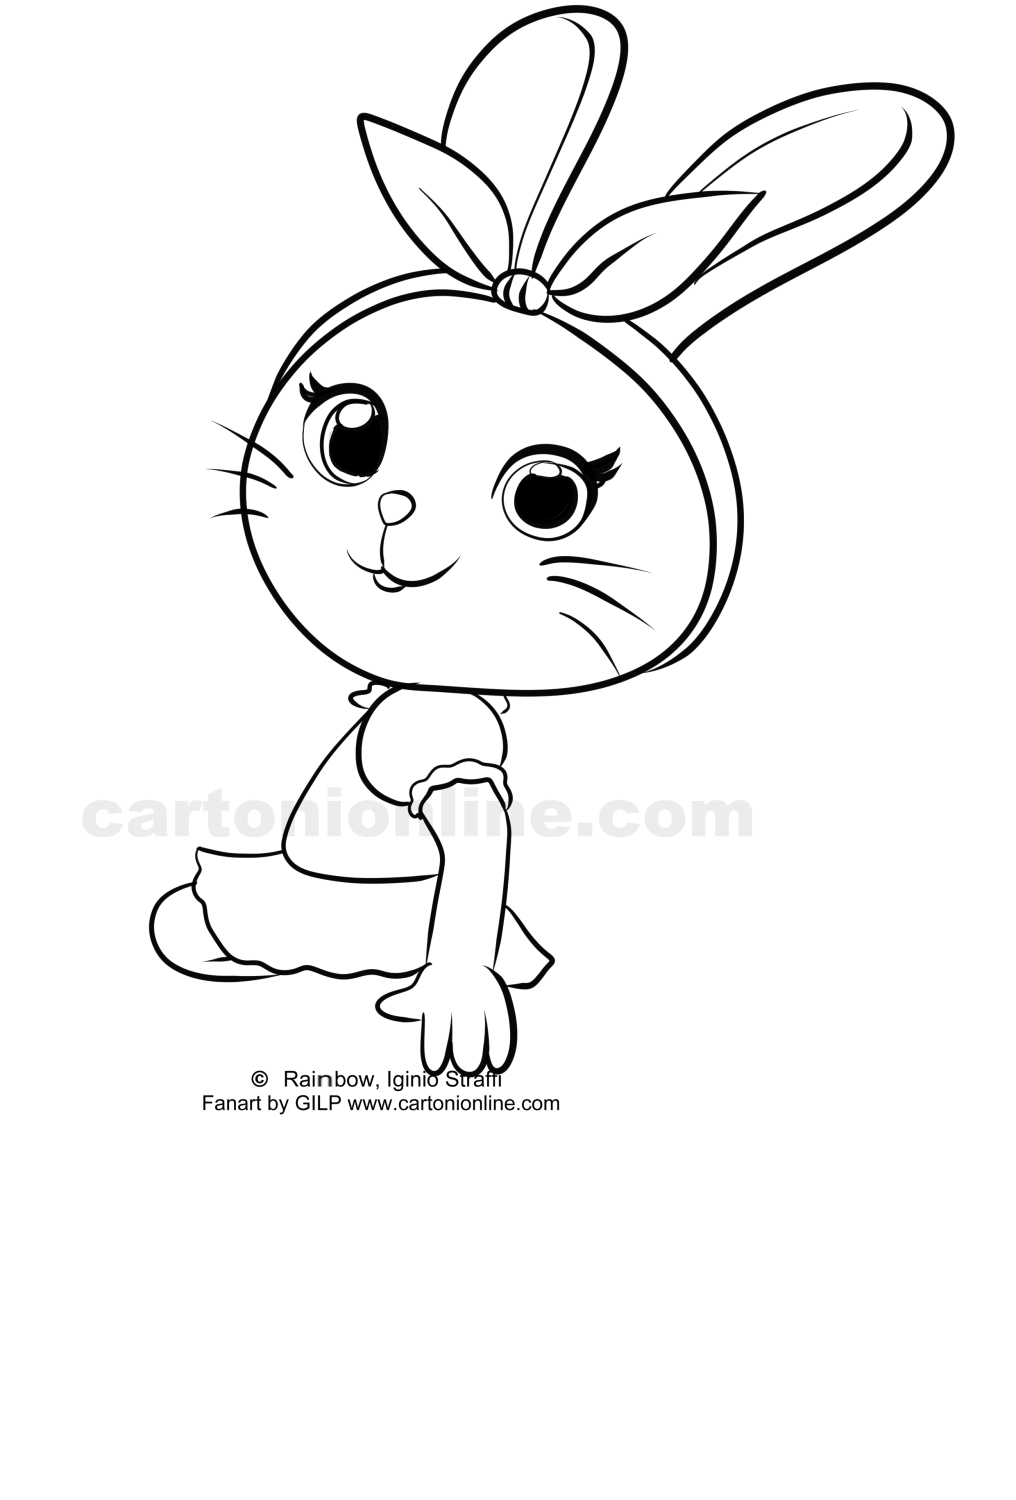 Summer by Summer & Todd coloring page to print and color